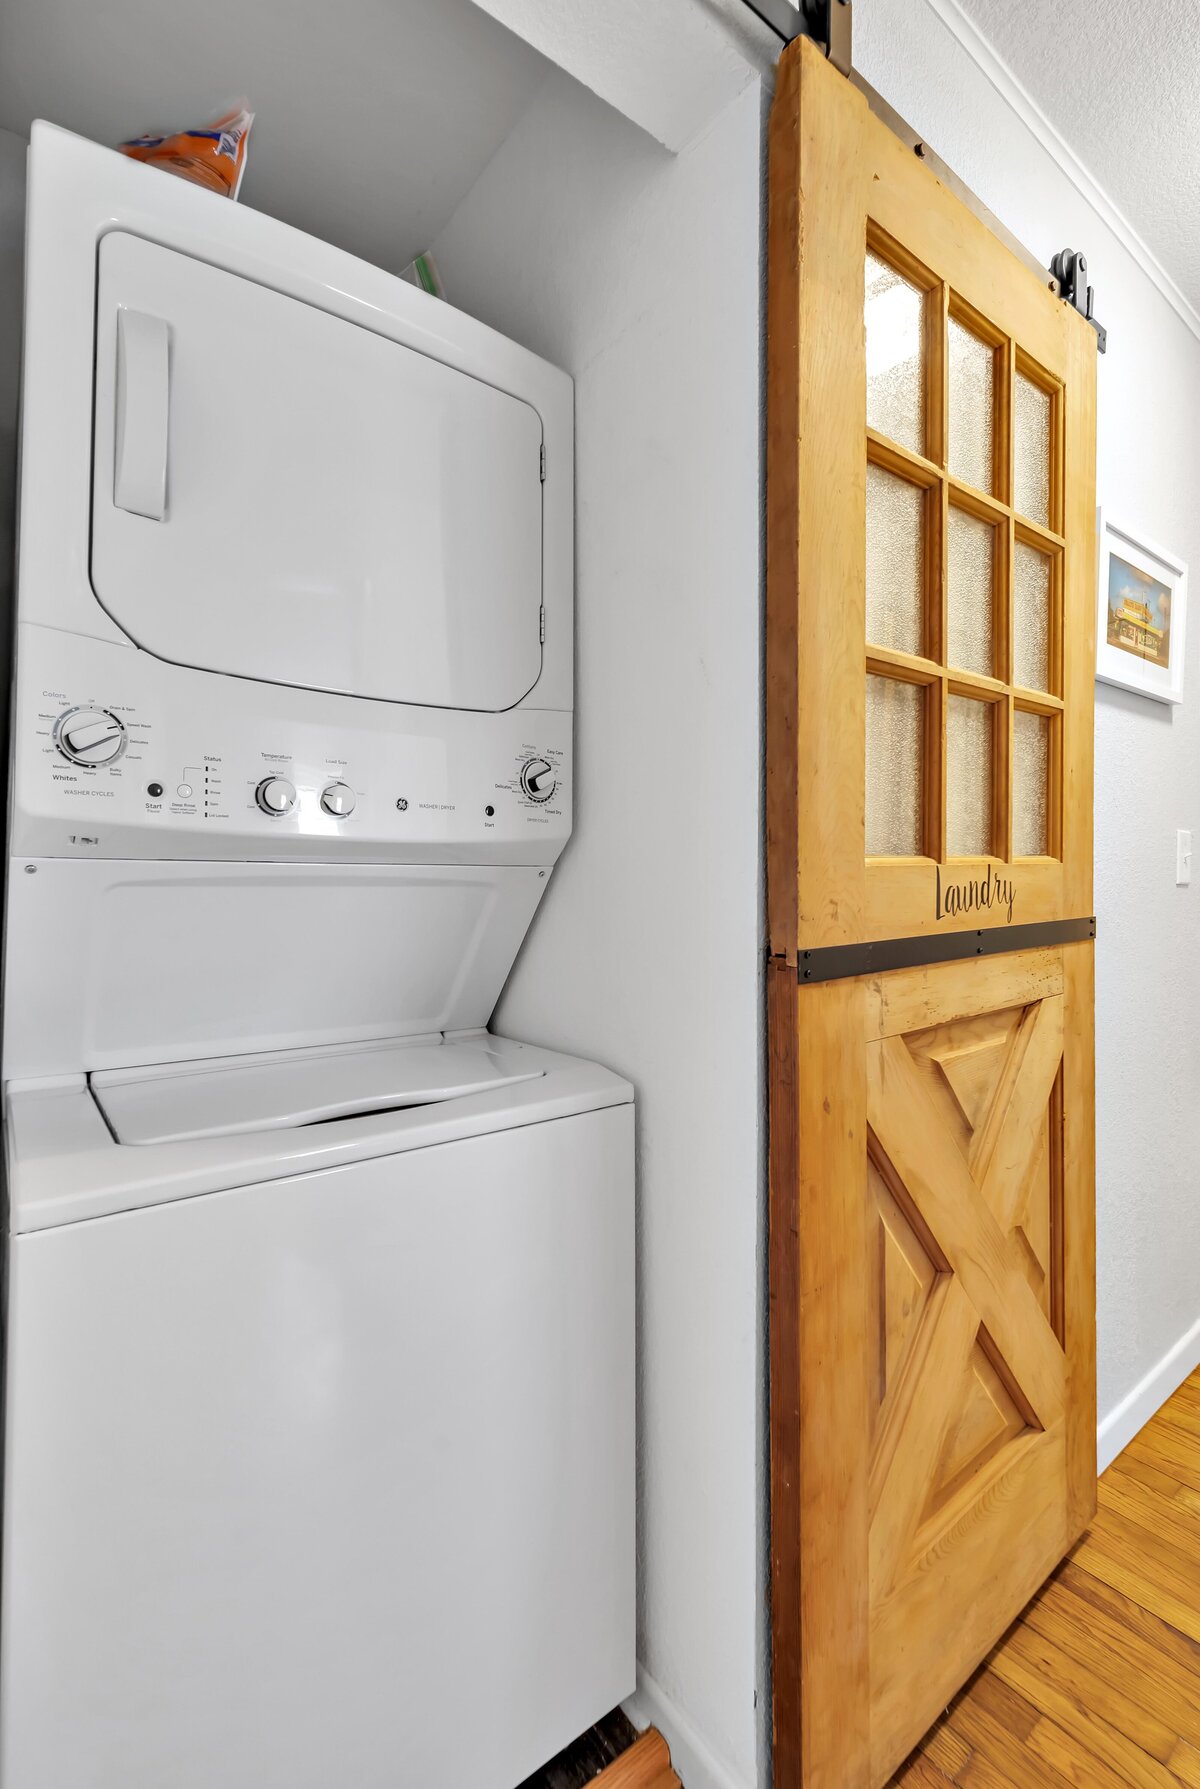 Laundry room with washer and dryer in this  three-bedroom, two-bathroom vacation rental house with free Wifi, fully equipped kitchen, office space, and room for six in downtown Waco, TX.